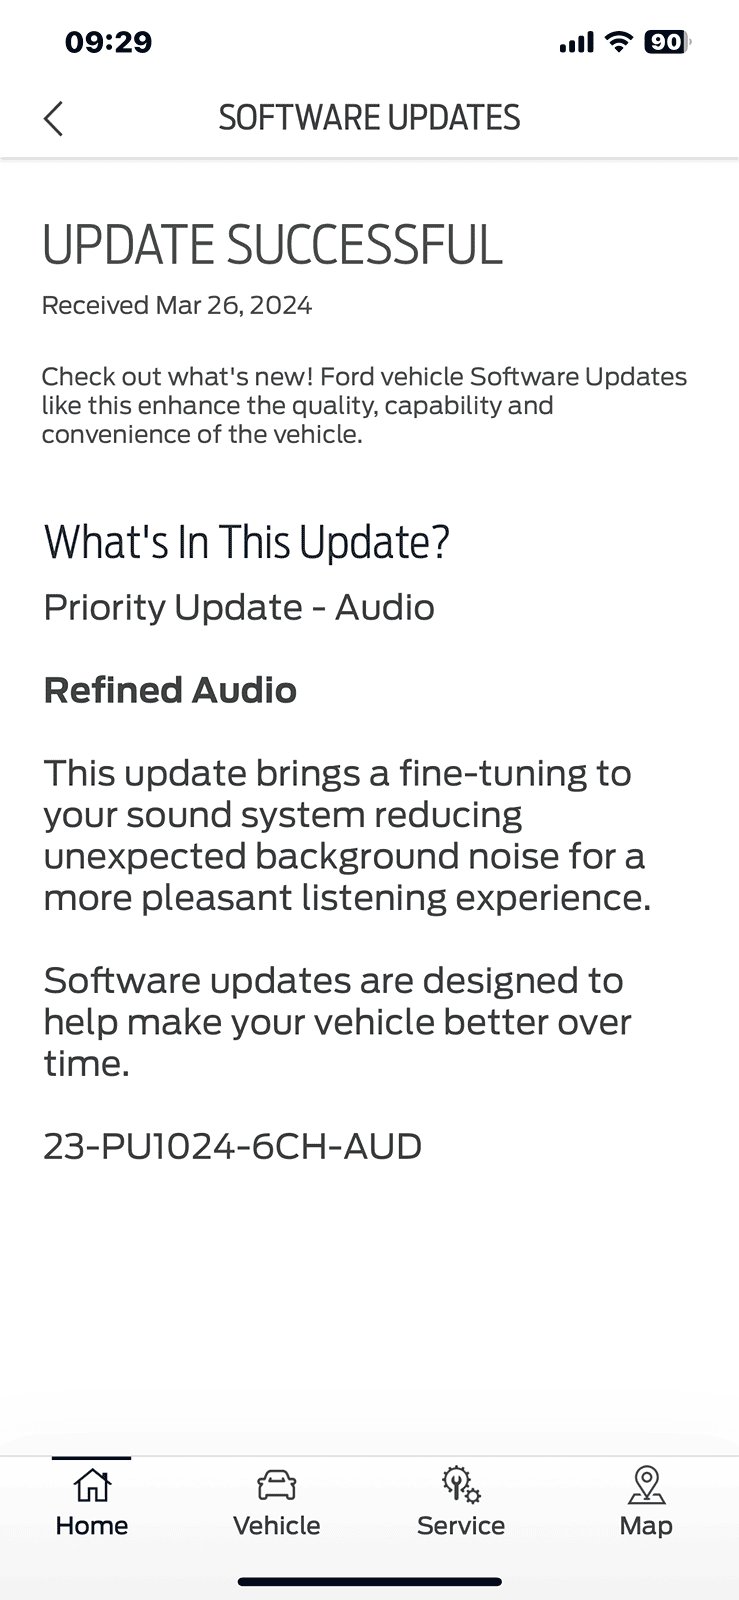 Ford F-150 Lightning Software Priority Update: 23-PU1024-6CH-AUD - Refined Audio IMG_2195